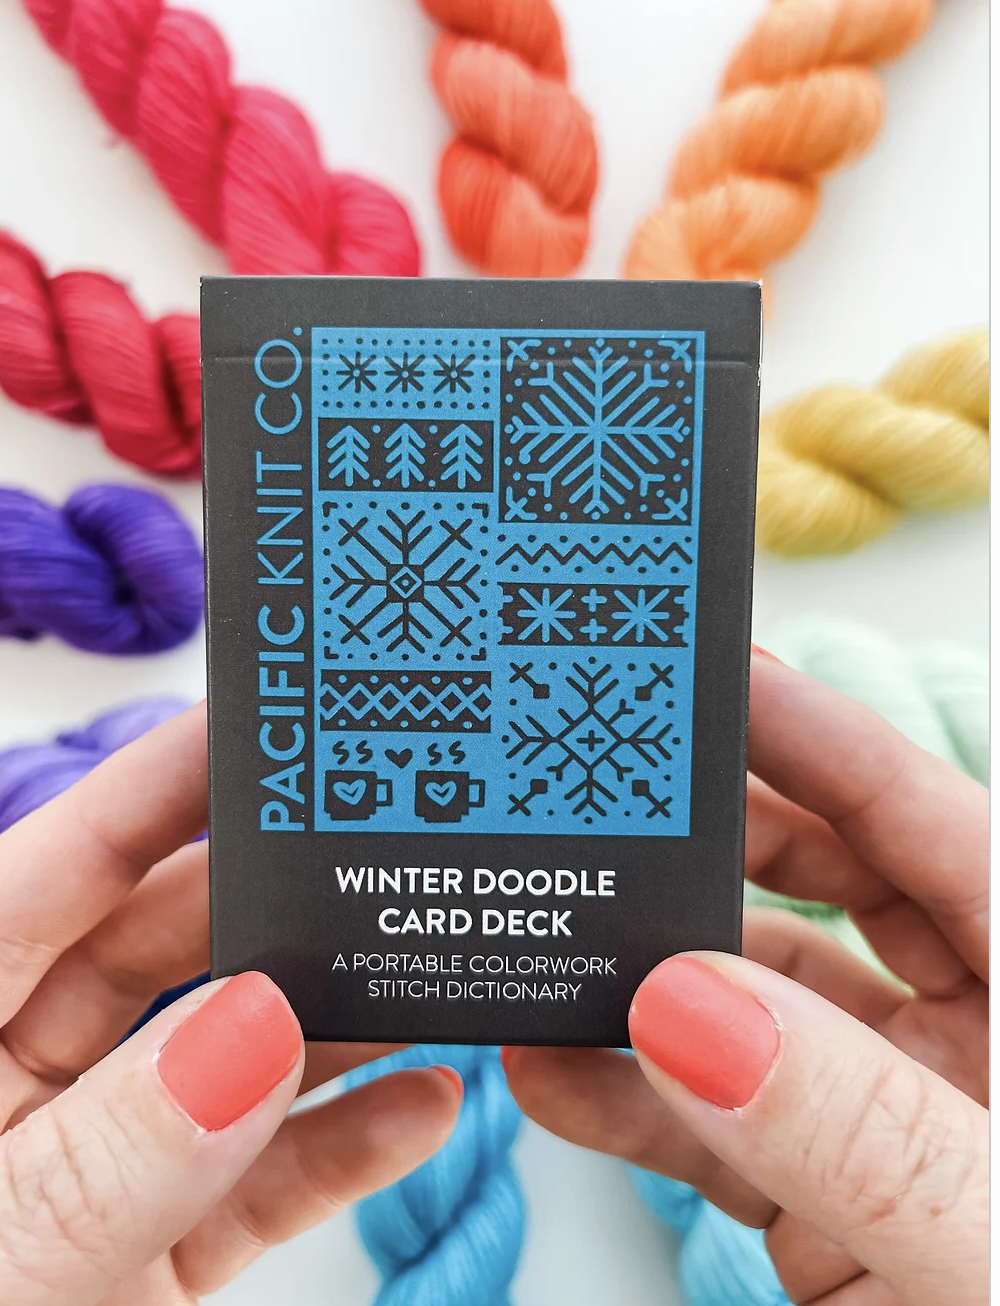 Doodle Deck Winter by Pacific Knit Co